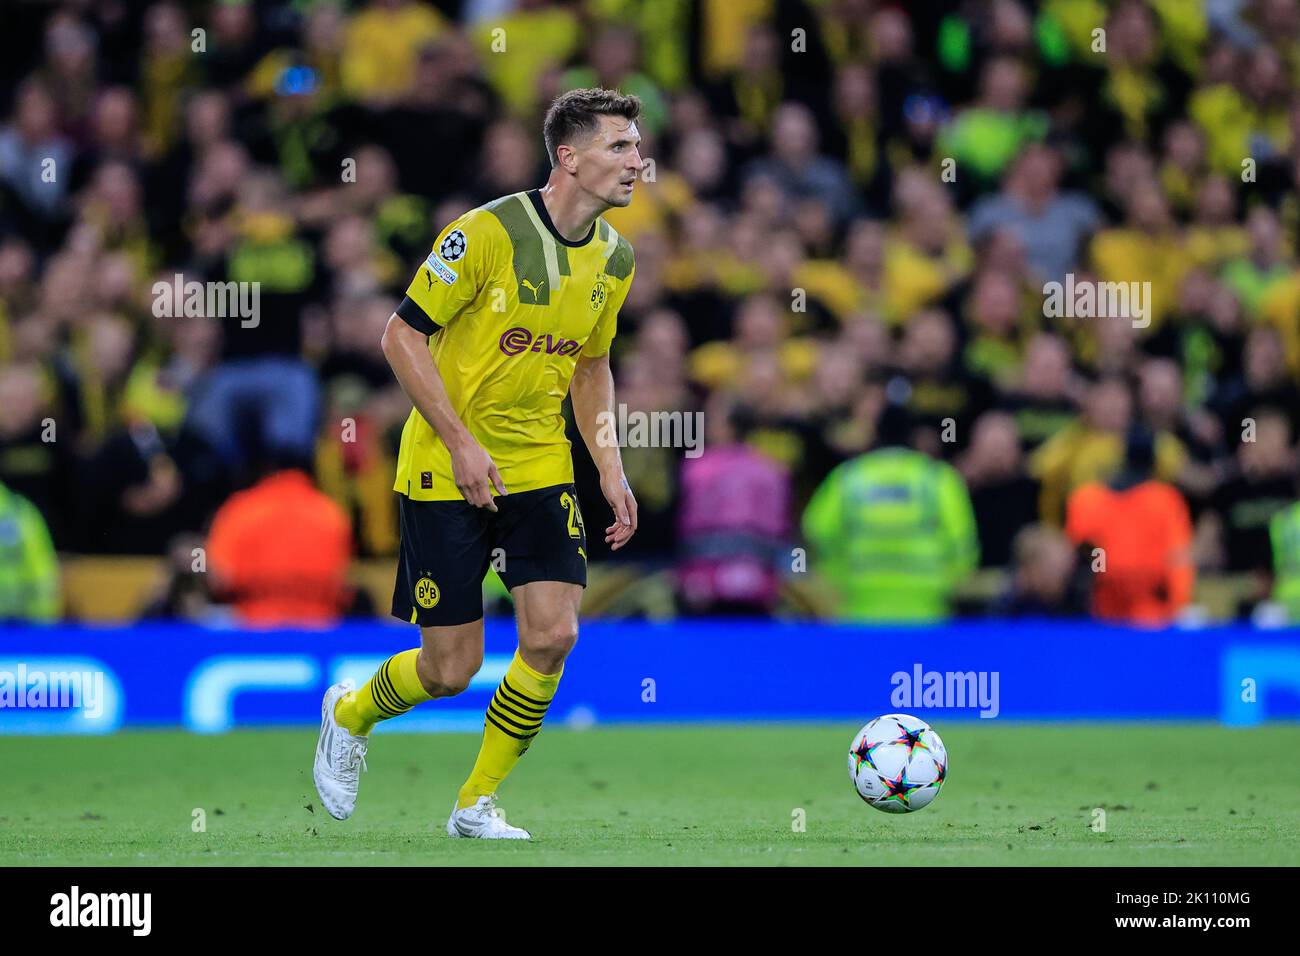 Manchester, UK. 14th Sep, 2022. Thomas Meunier #24 of Borussia Dortmund controls the ball during the UEFA Champions League match Manchester City vs Borussia Dortmund at Etihad Stadium, Manchester, United Kingdom, 14th September 2022 (Photo by Conor Molloy/News Images) Credit: News Images LTD/Alamy Live News Stock Photo